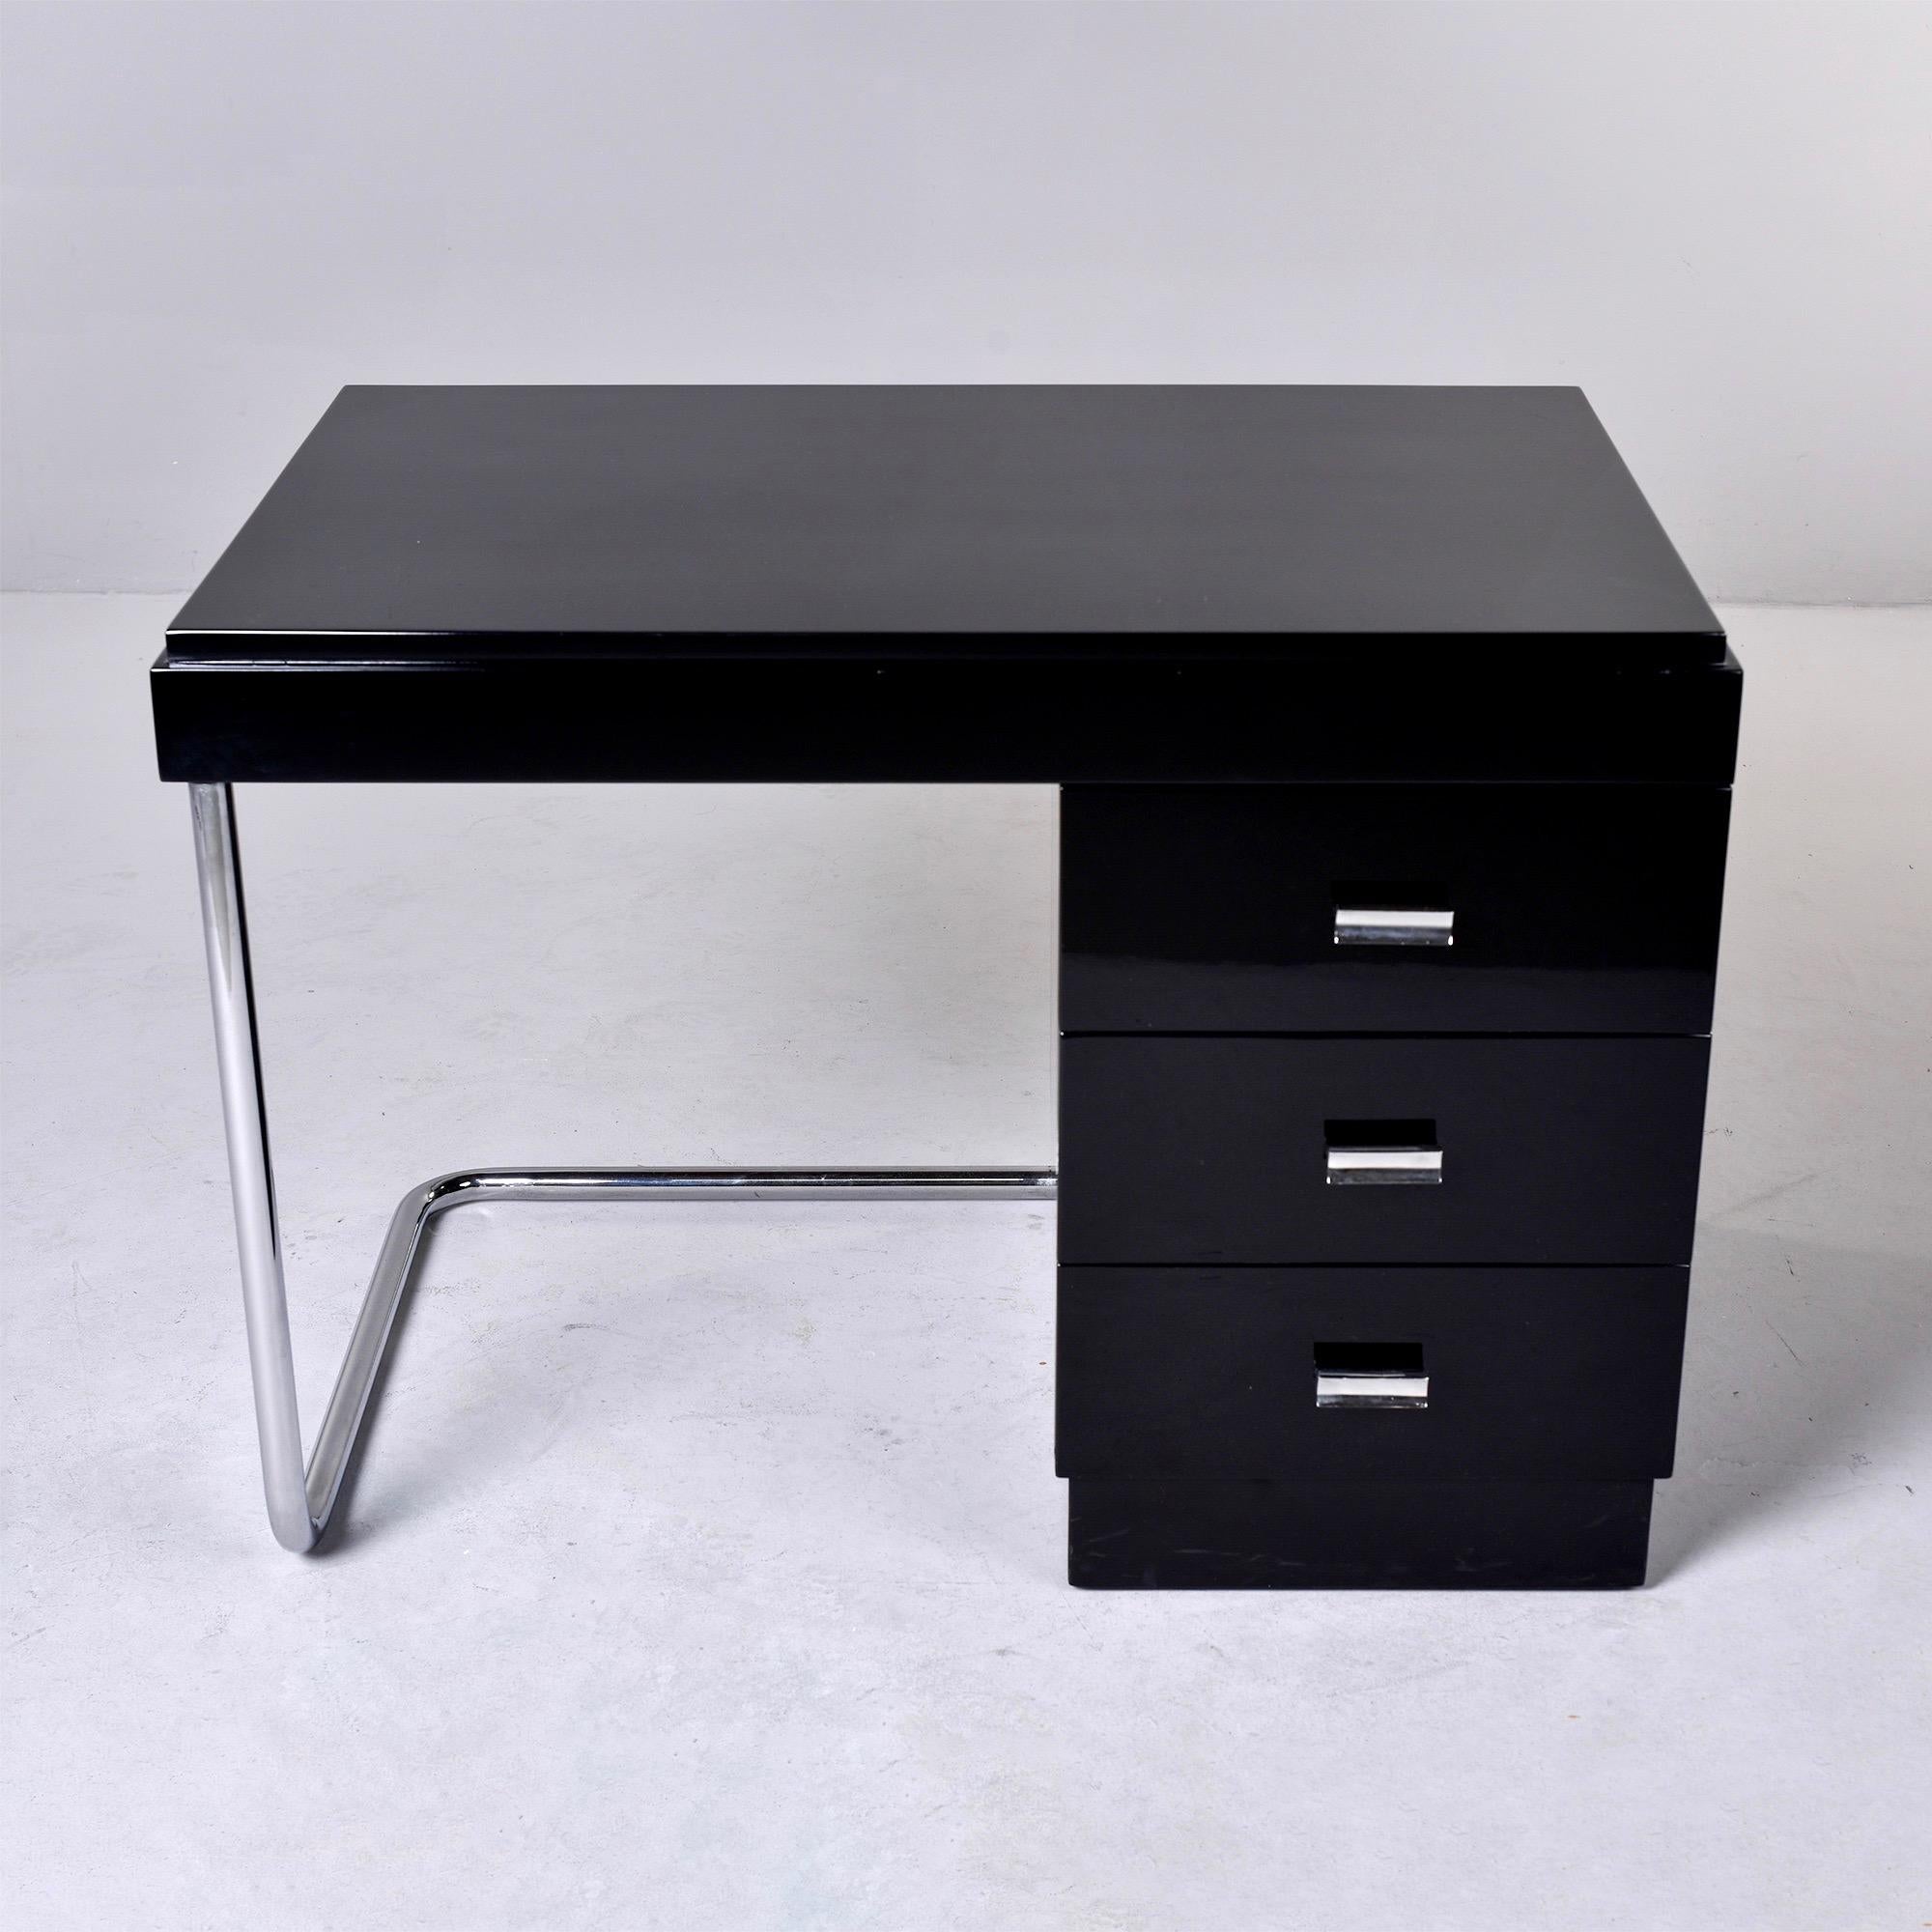 Found in England, this circa 1930s Art Deco desk has a streamlined machine age / industrial style. Desk top with three functional drawers and stainless steel leg and base. Unknown maker. Mahogany with new, professionally applied black finish.